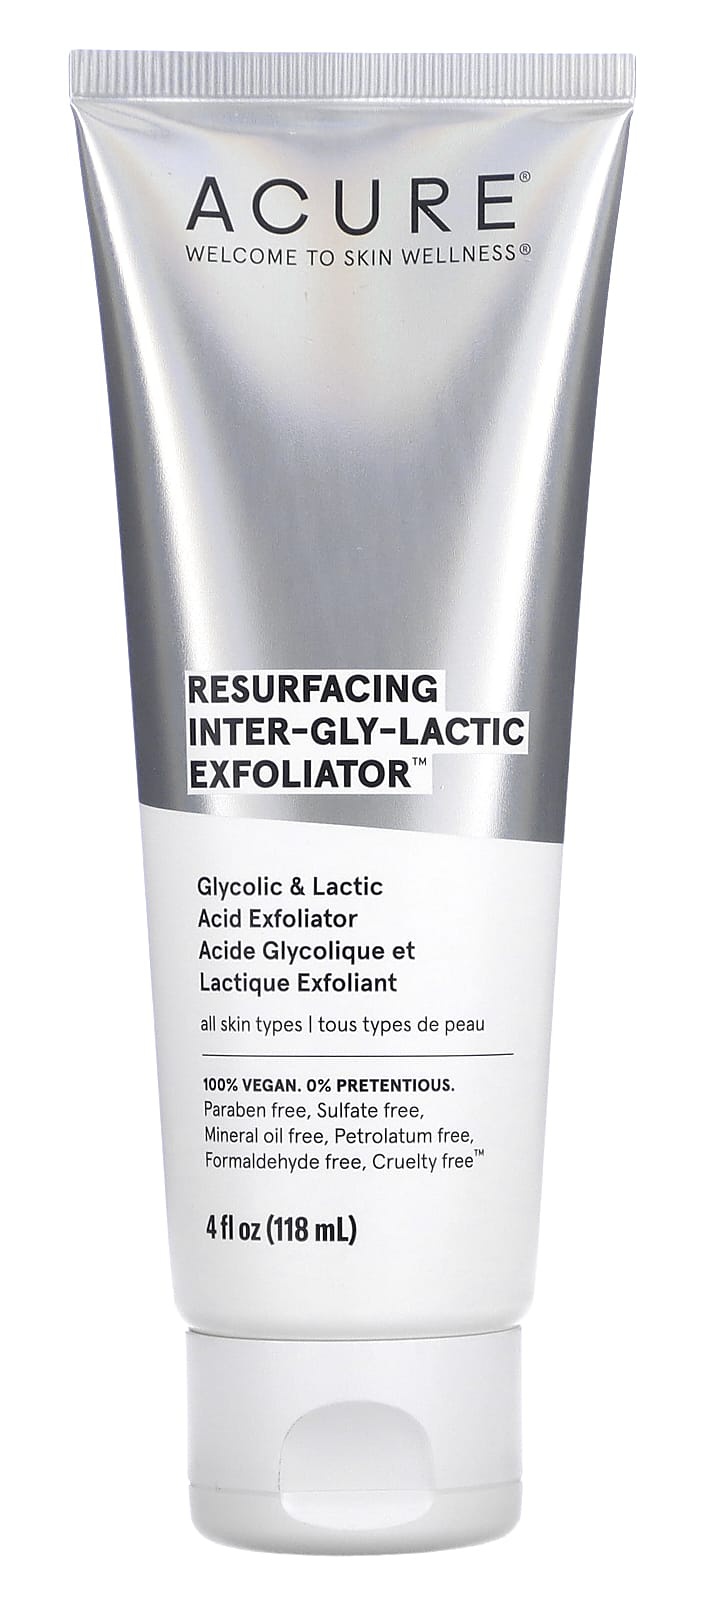 Acure Resurfacing Inter-gly-lactic Exfoliator